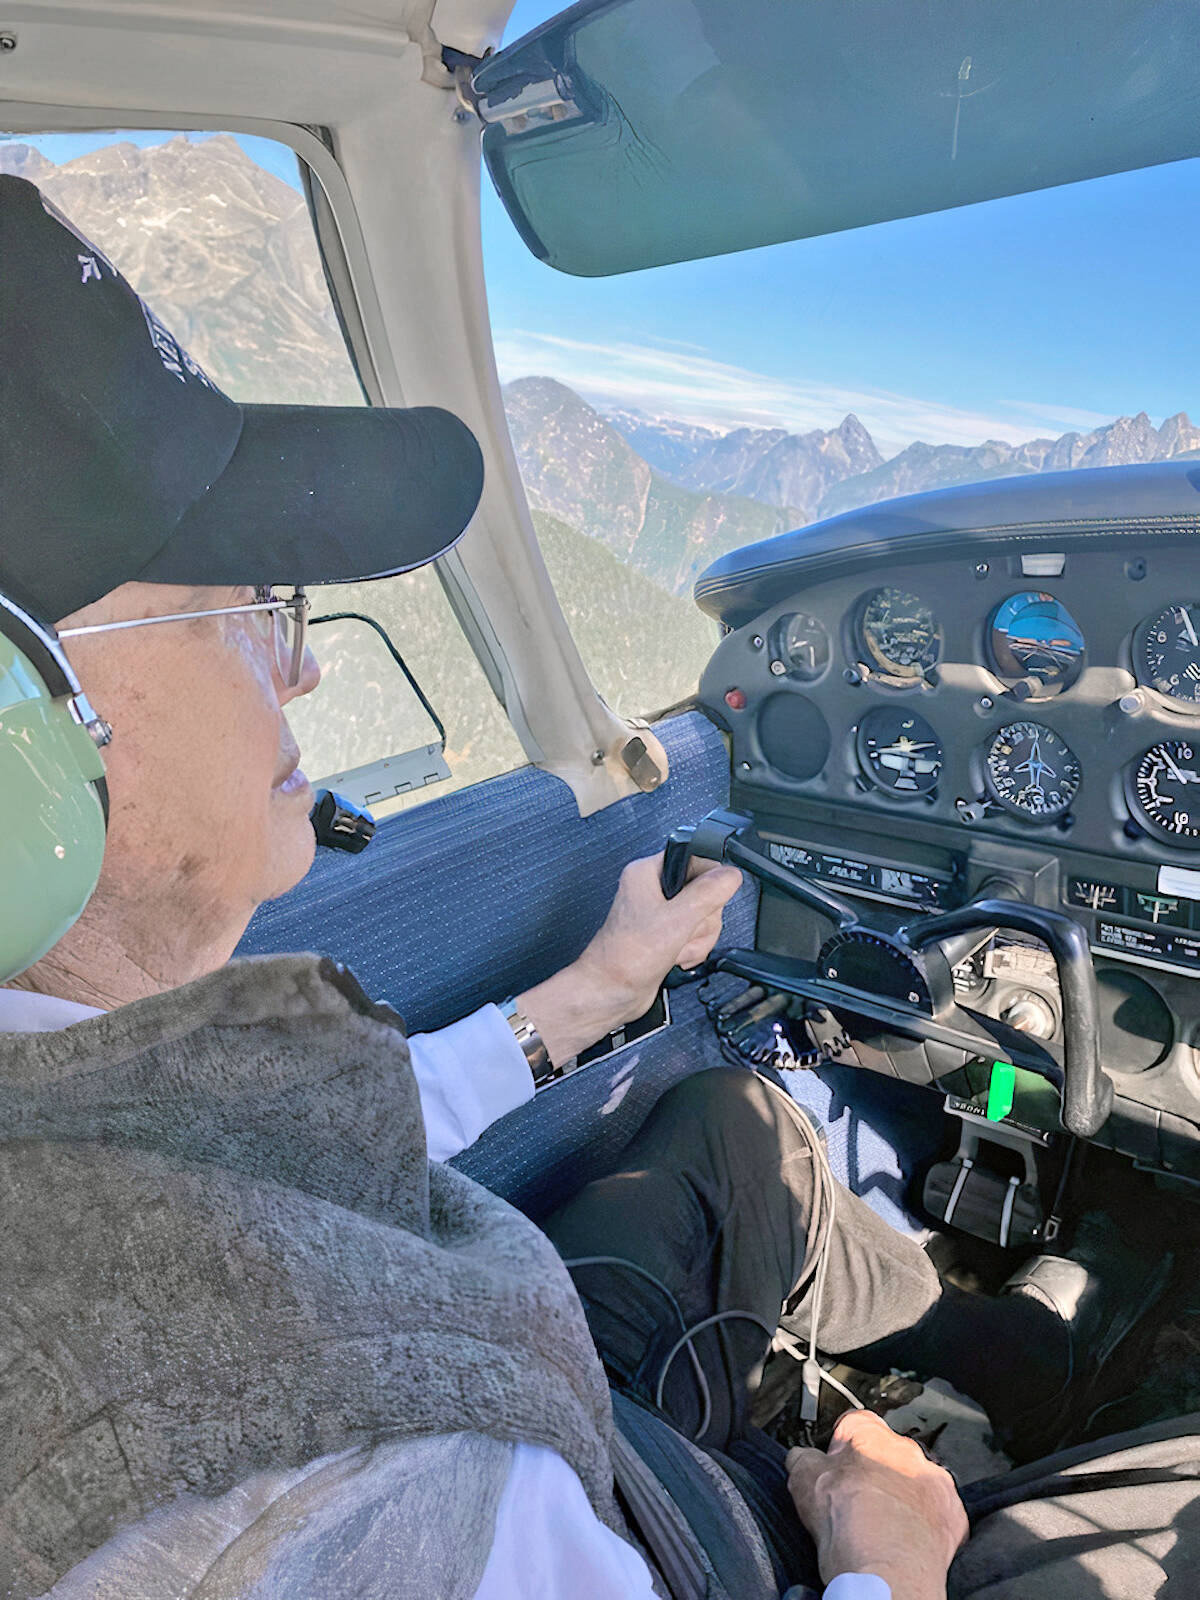 An adventurous Walter Martens is seen at the controls of his first flying lesson, a 101st birthday present, from the Langley airport on Saturday, Sept. 25. (Special to Langley Advance Times)